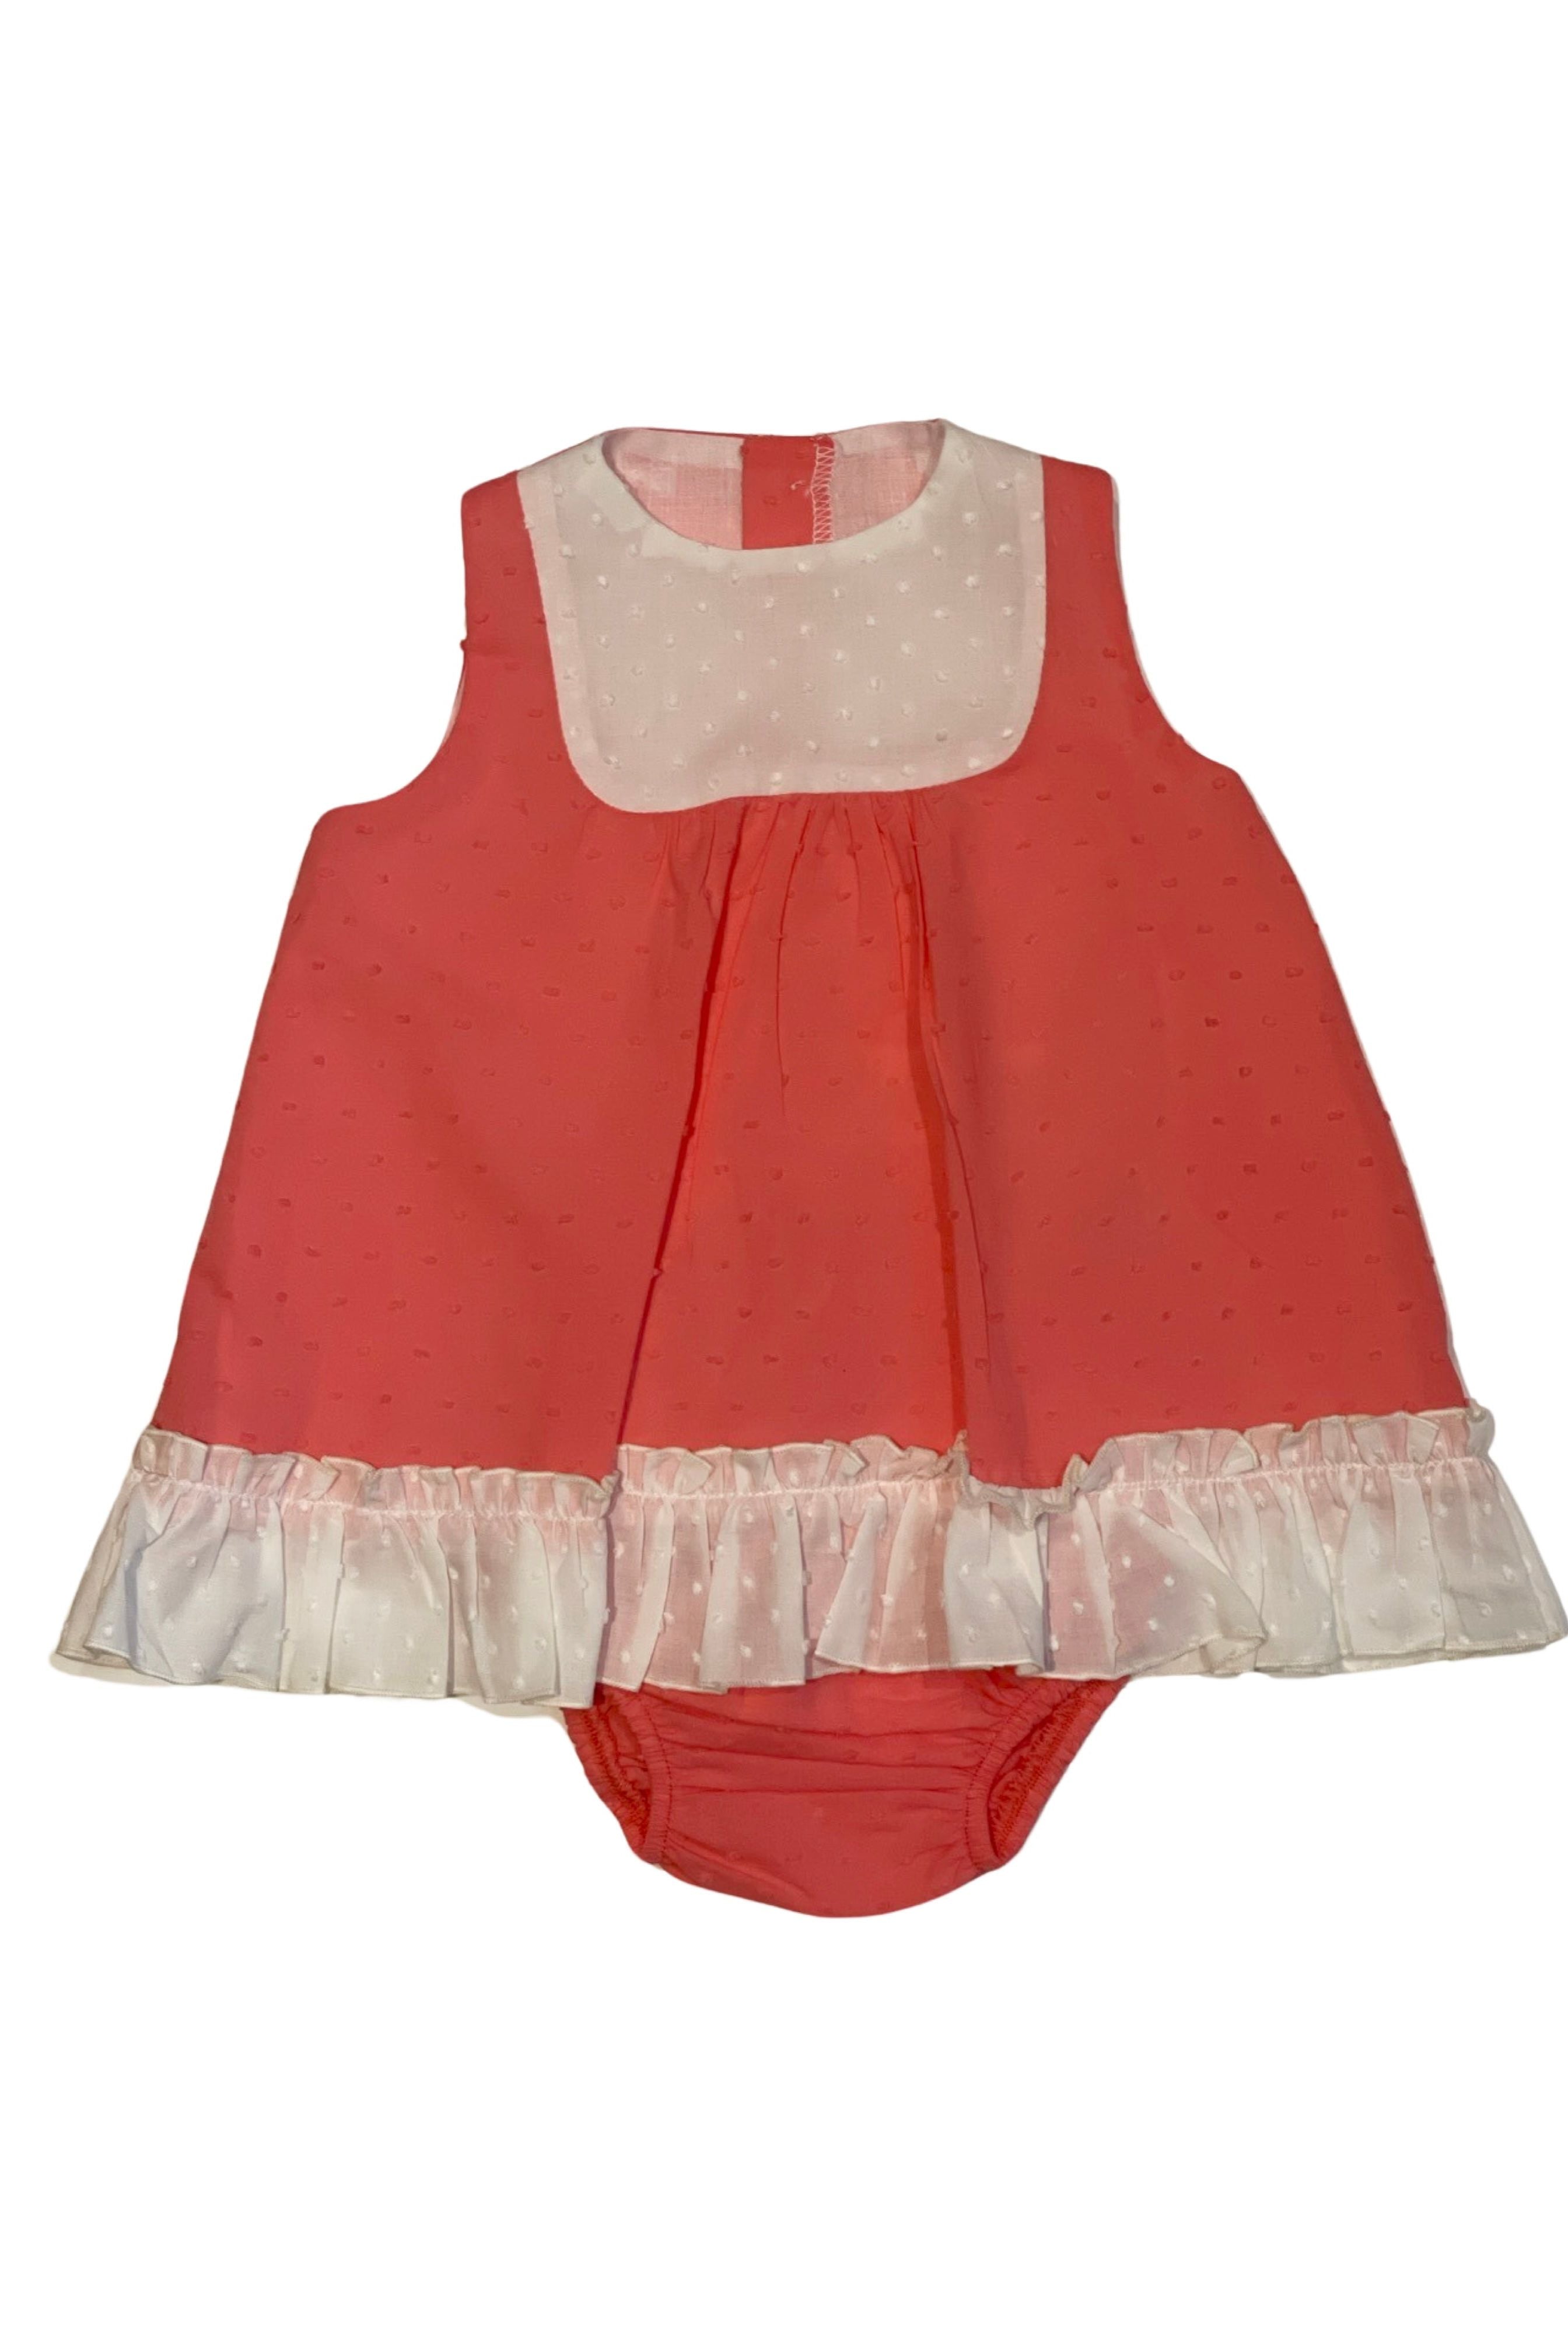 SS24 Lor Miral Baby Girls Pink Plumitti Dress & Knickers Dainty Delilah